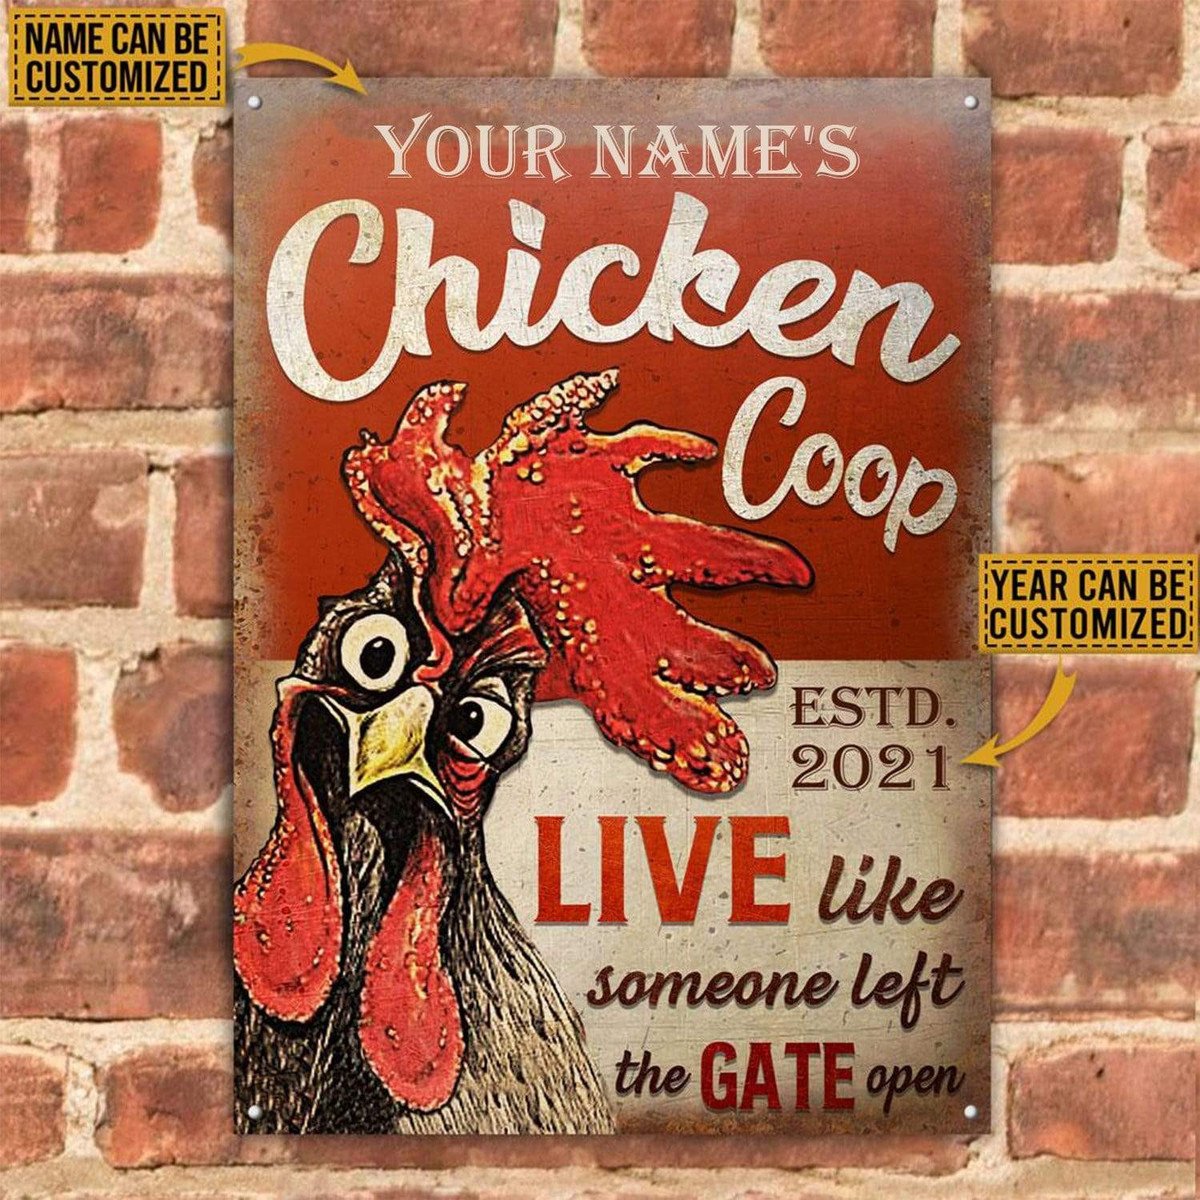 Personalized Chicken Coop The Gate Open Customized Classic Metal Signs